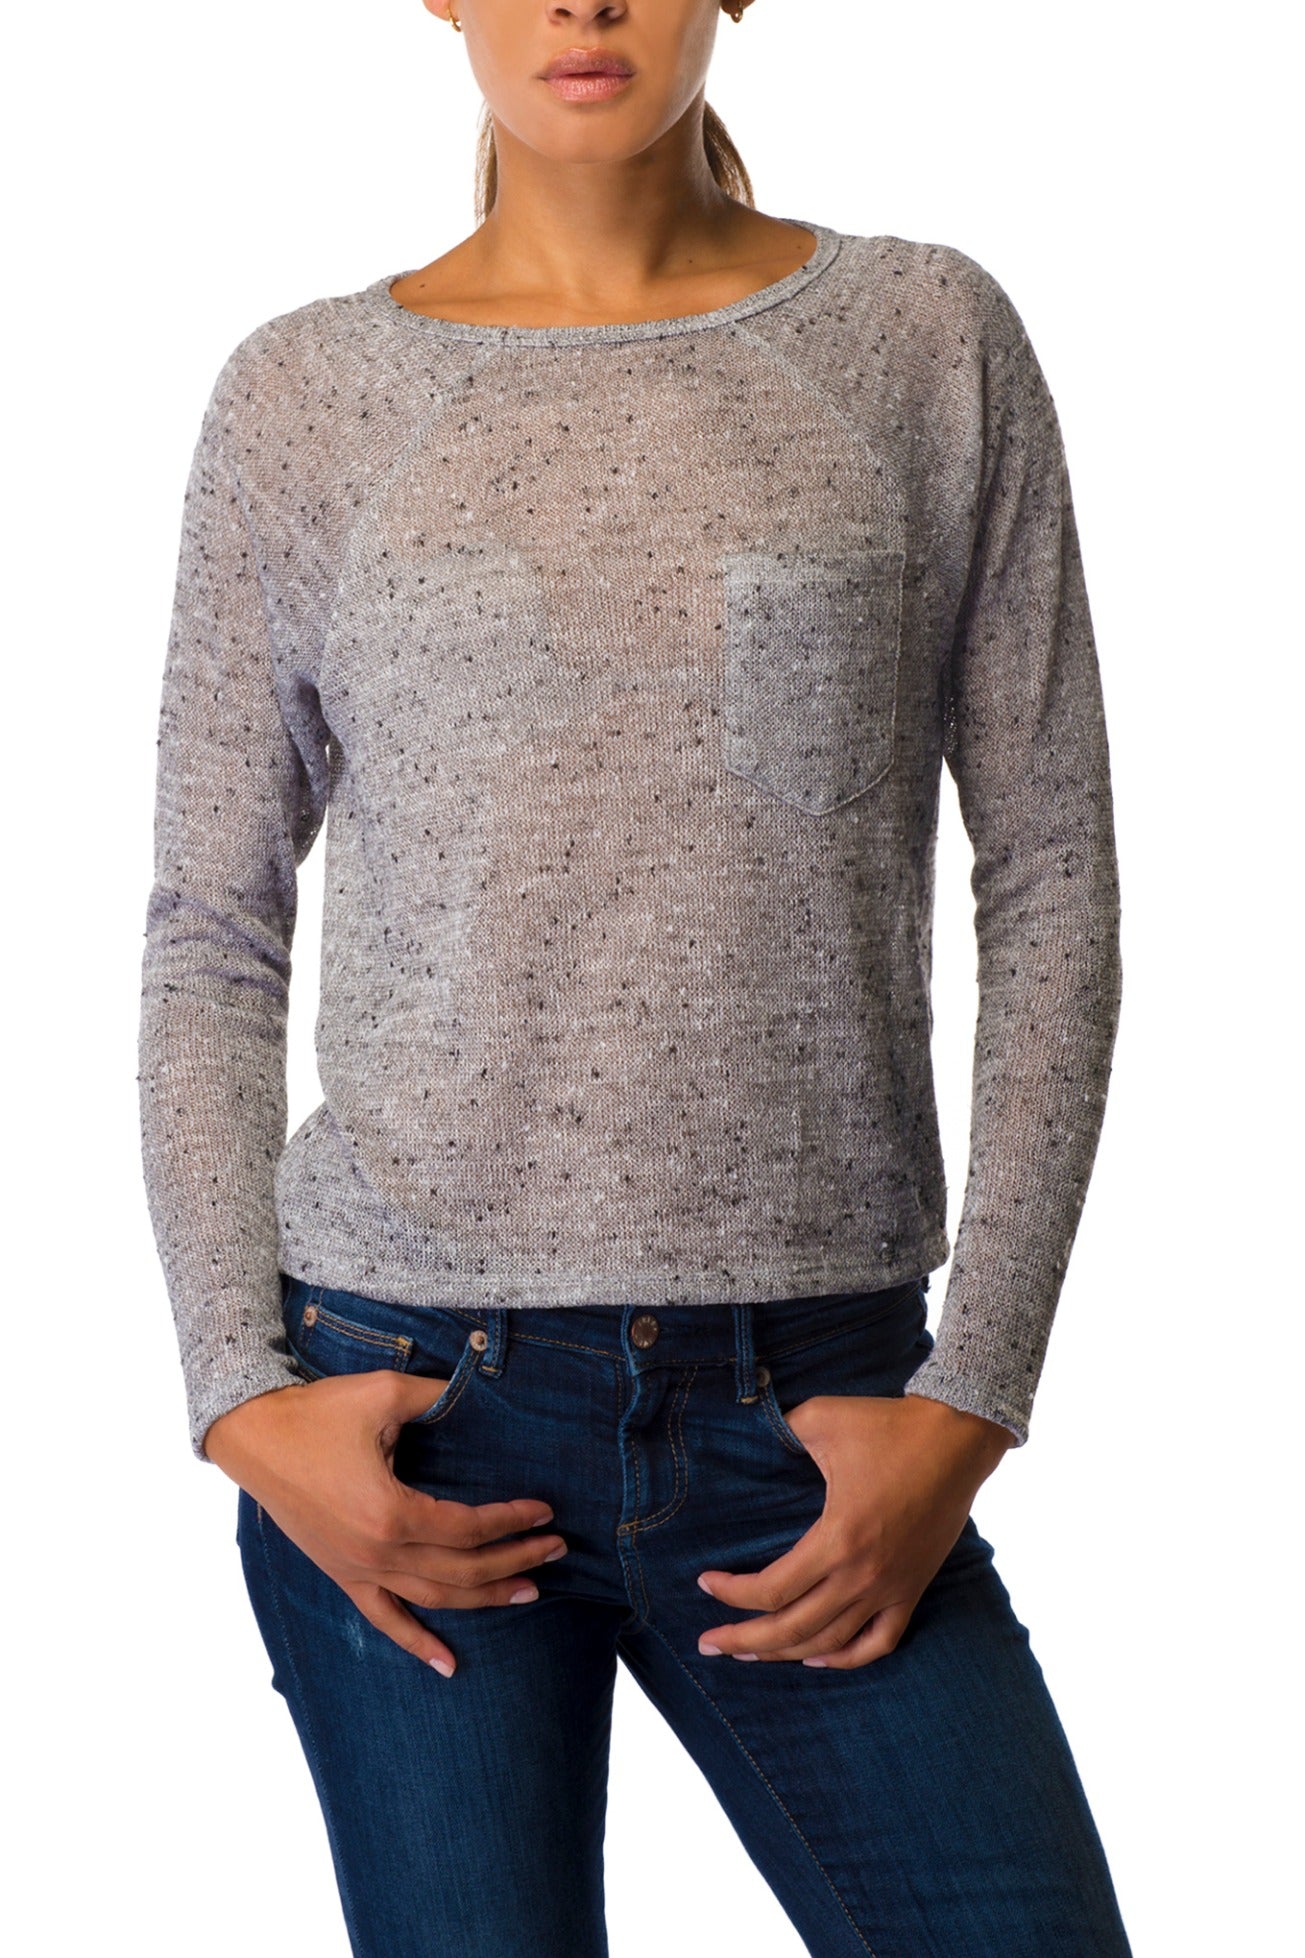 Long Sleeve Top With Pocket